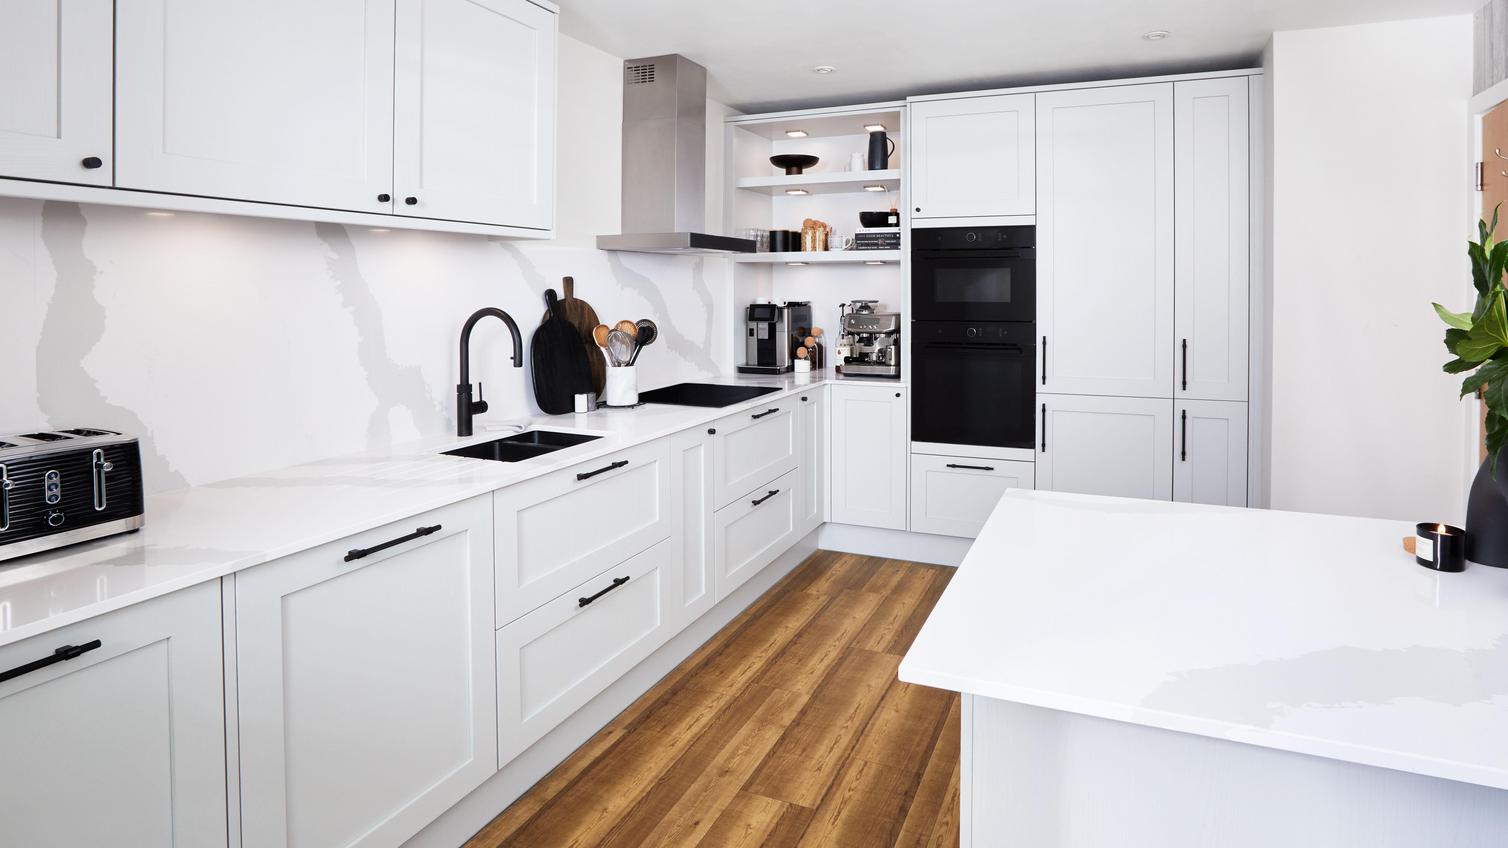 A shaker kitchen with dove-grey doors in an L-shape layout. Includes a black double oven, bespoke shelving, and an inset sink/